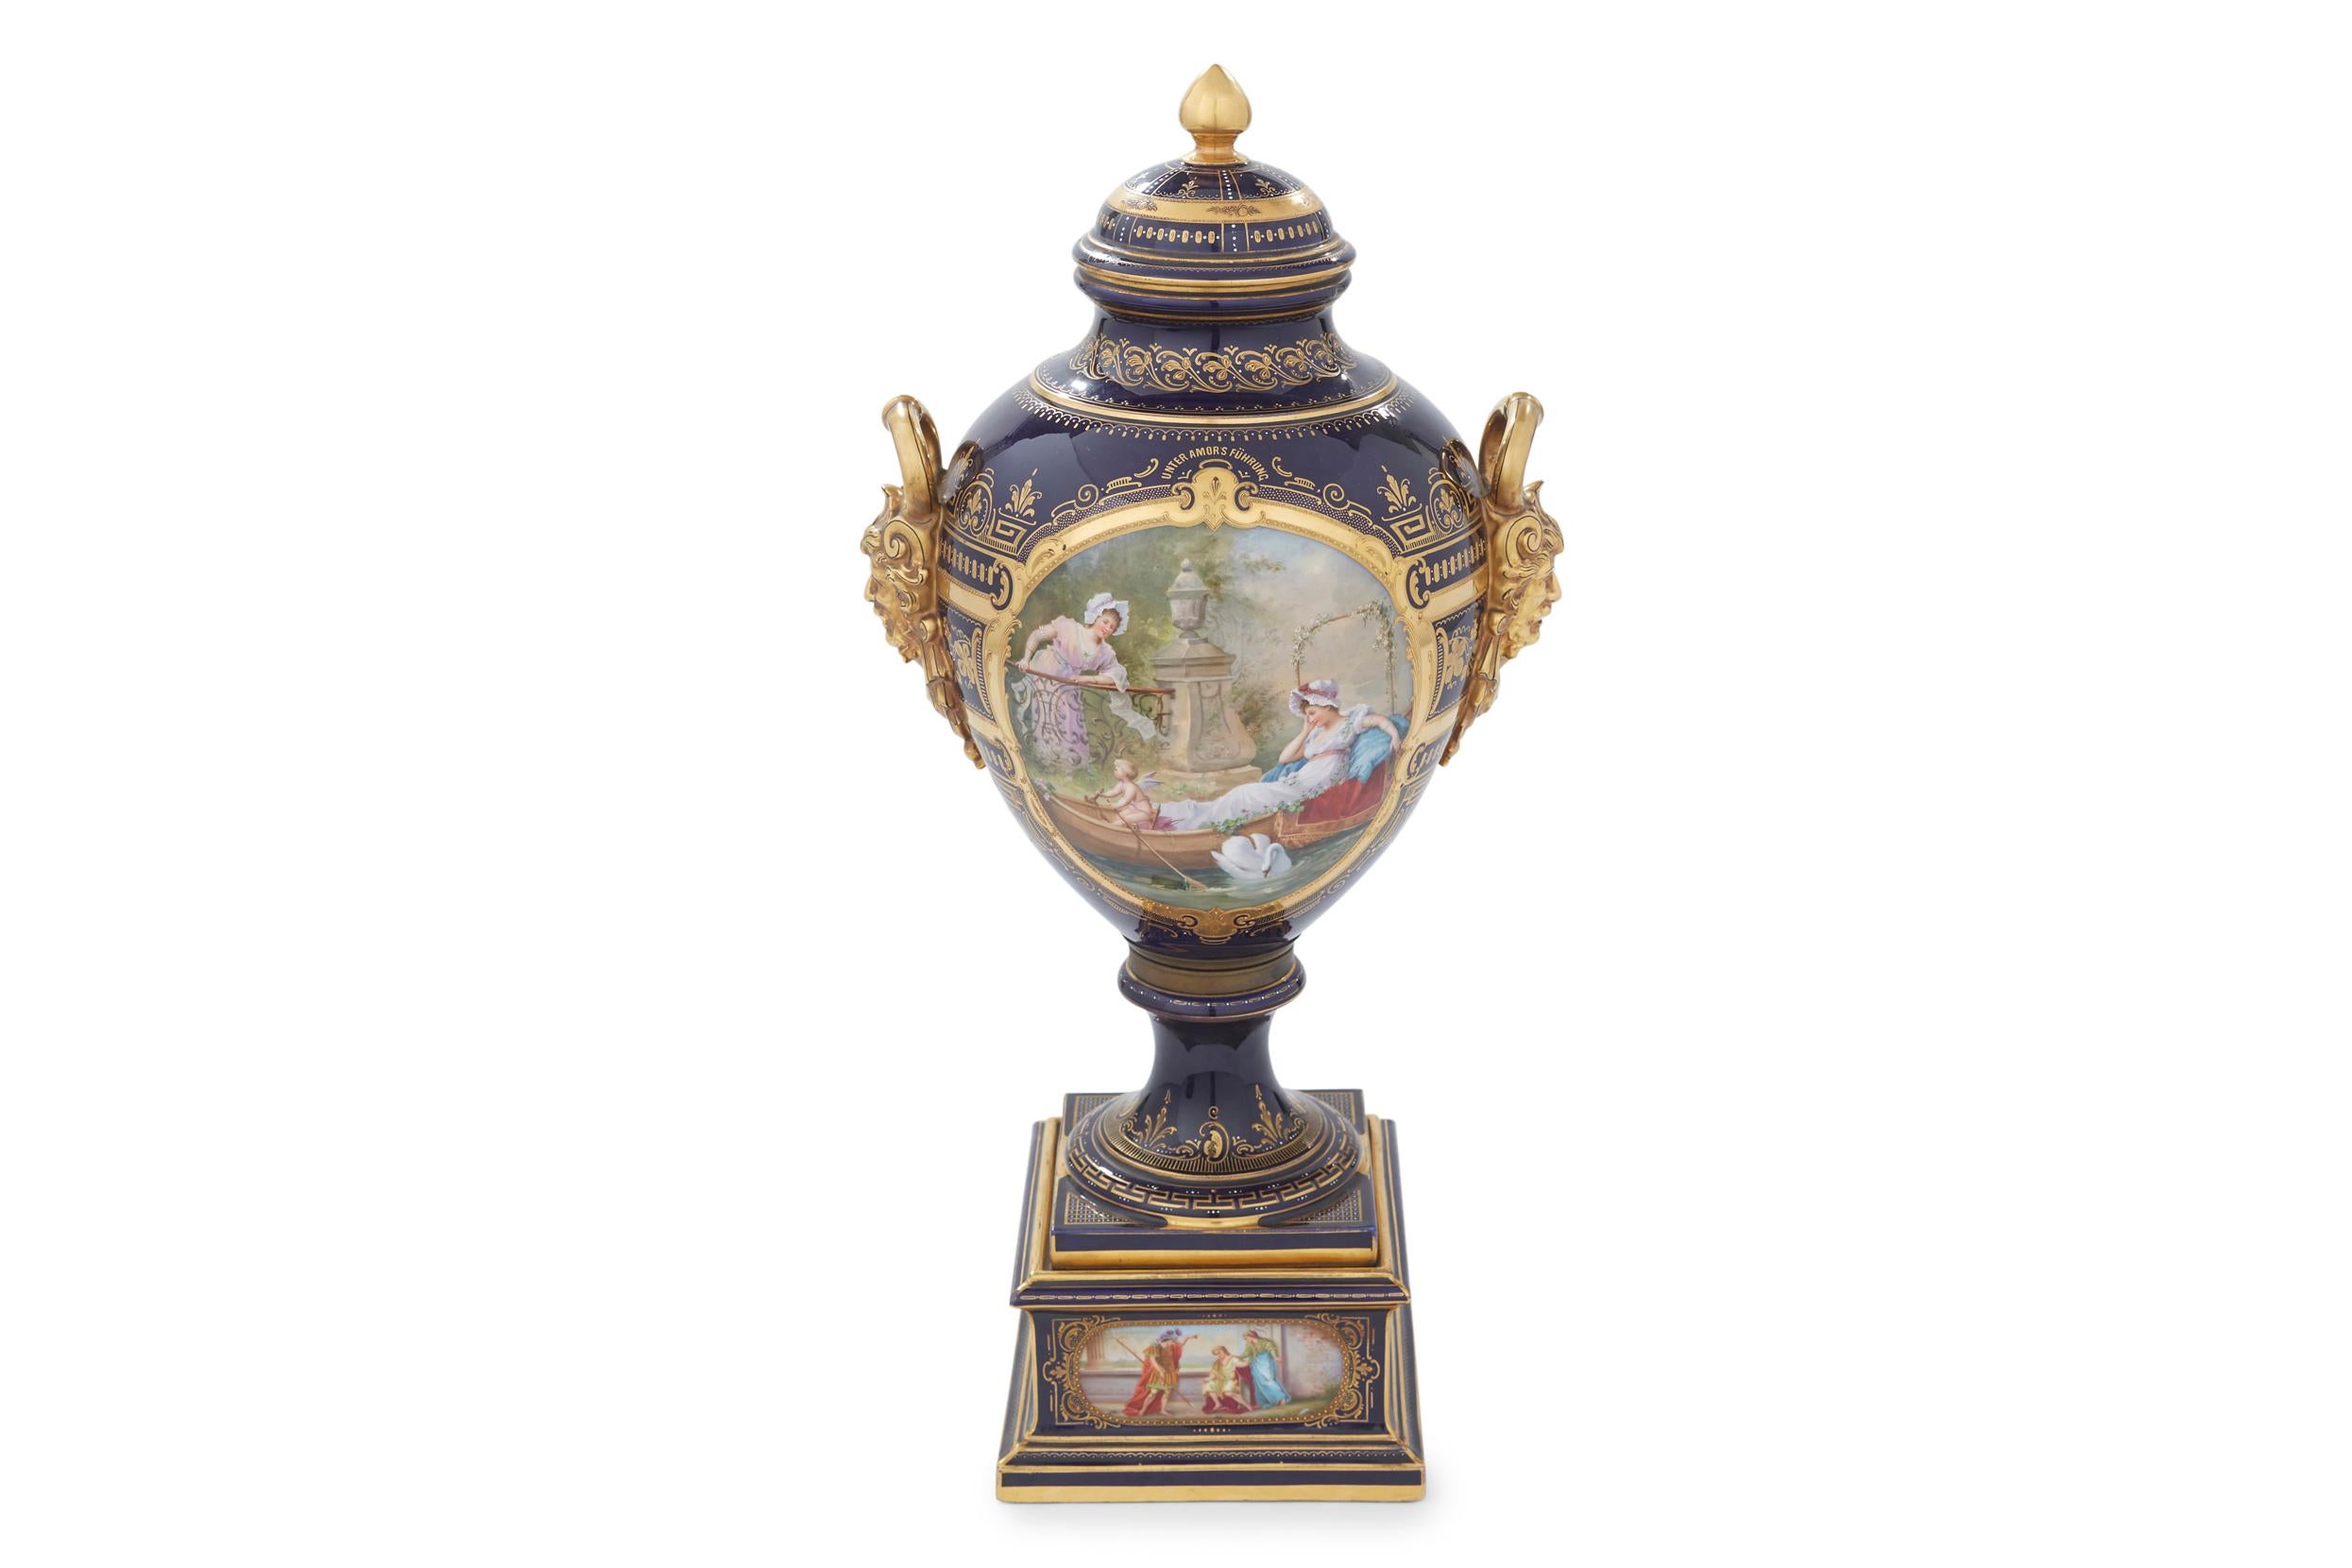 19th century gilt gold with exterior hand painted scene design details covered decorative urn / piece. The exterior garden scene details was painted by W. Schnider. The covered urn feature a baluster form, with two handles formed from a man's head.